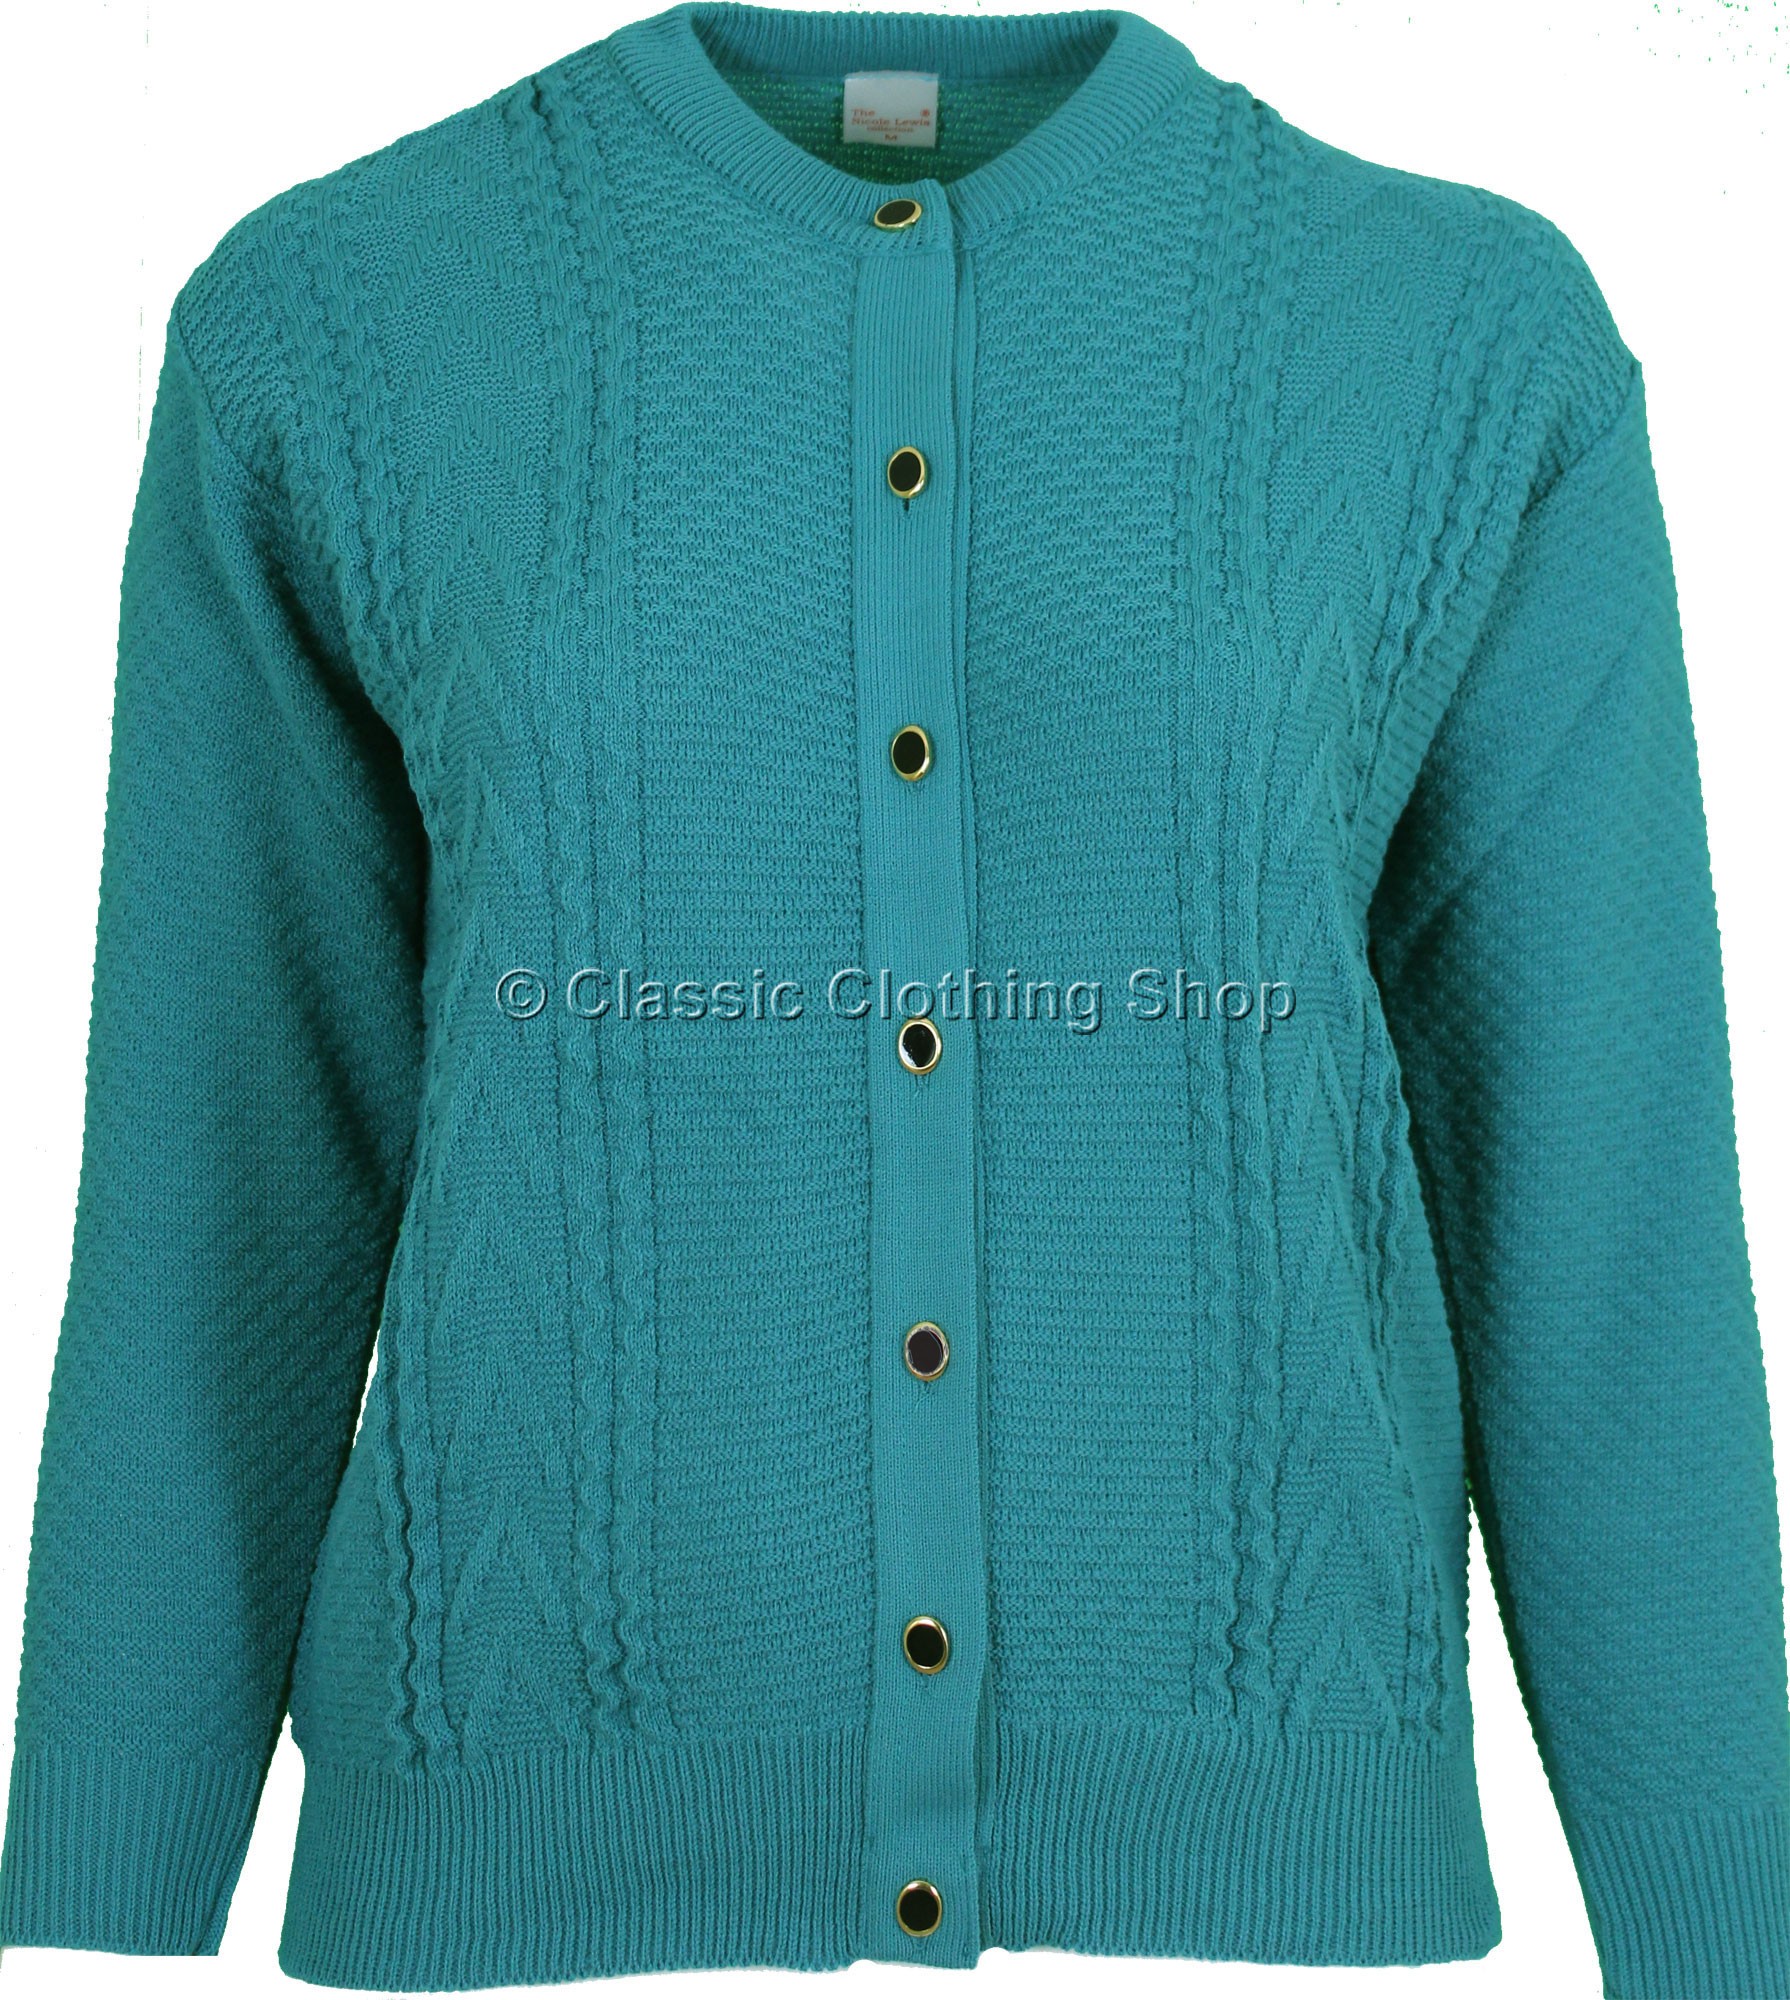 Capers Teal Round Neck Cardigan